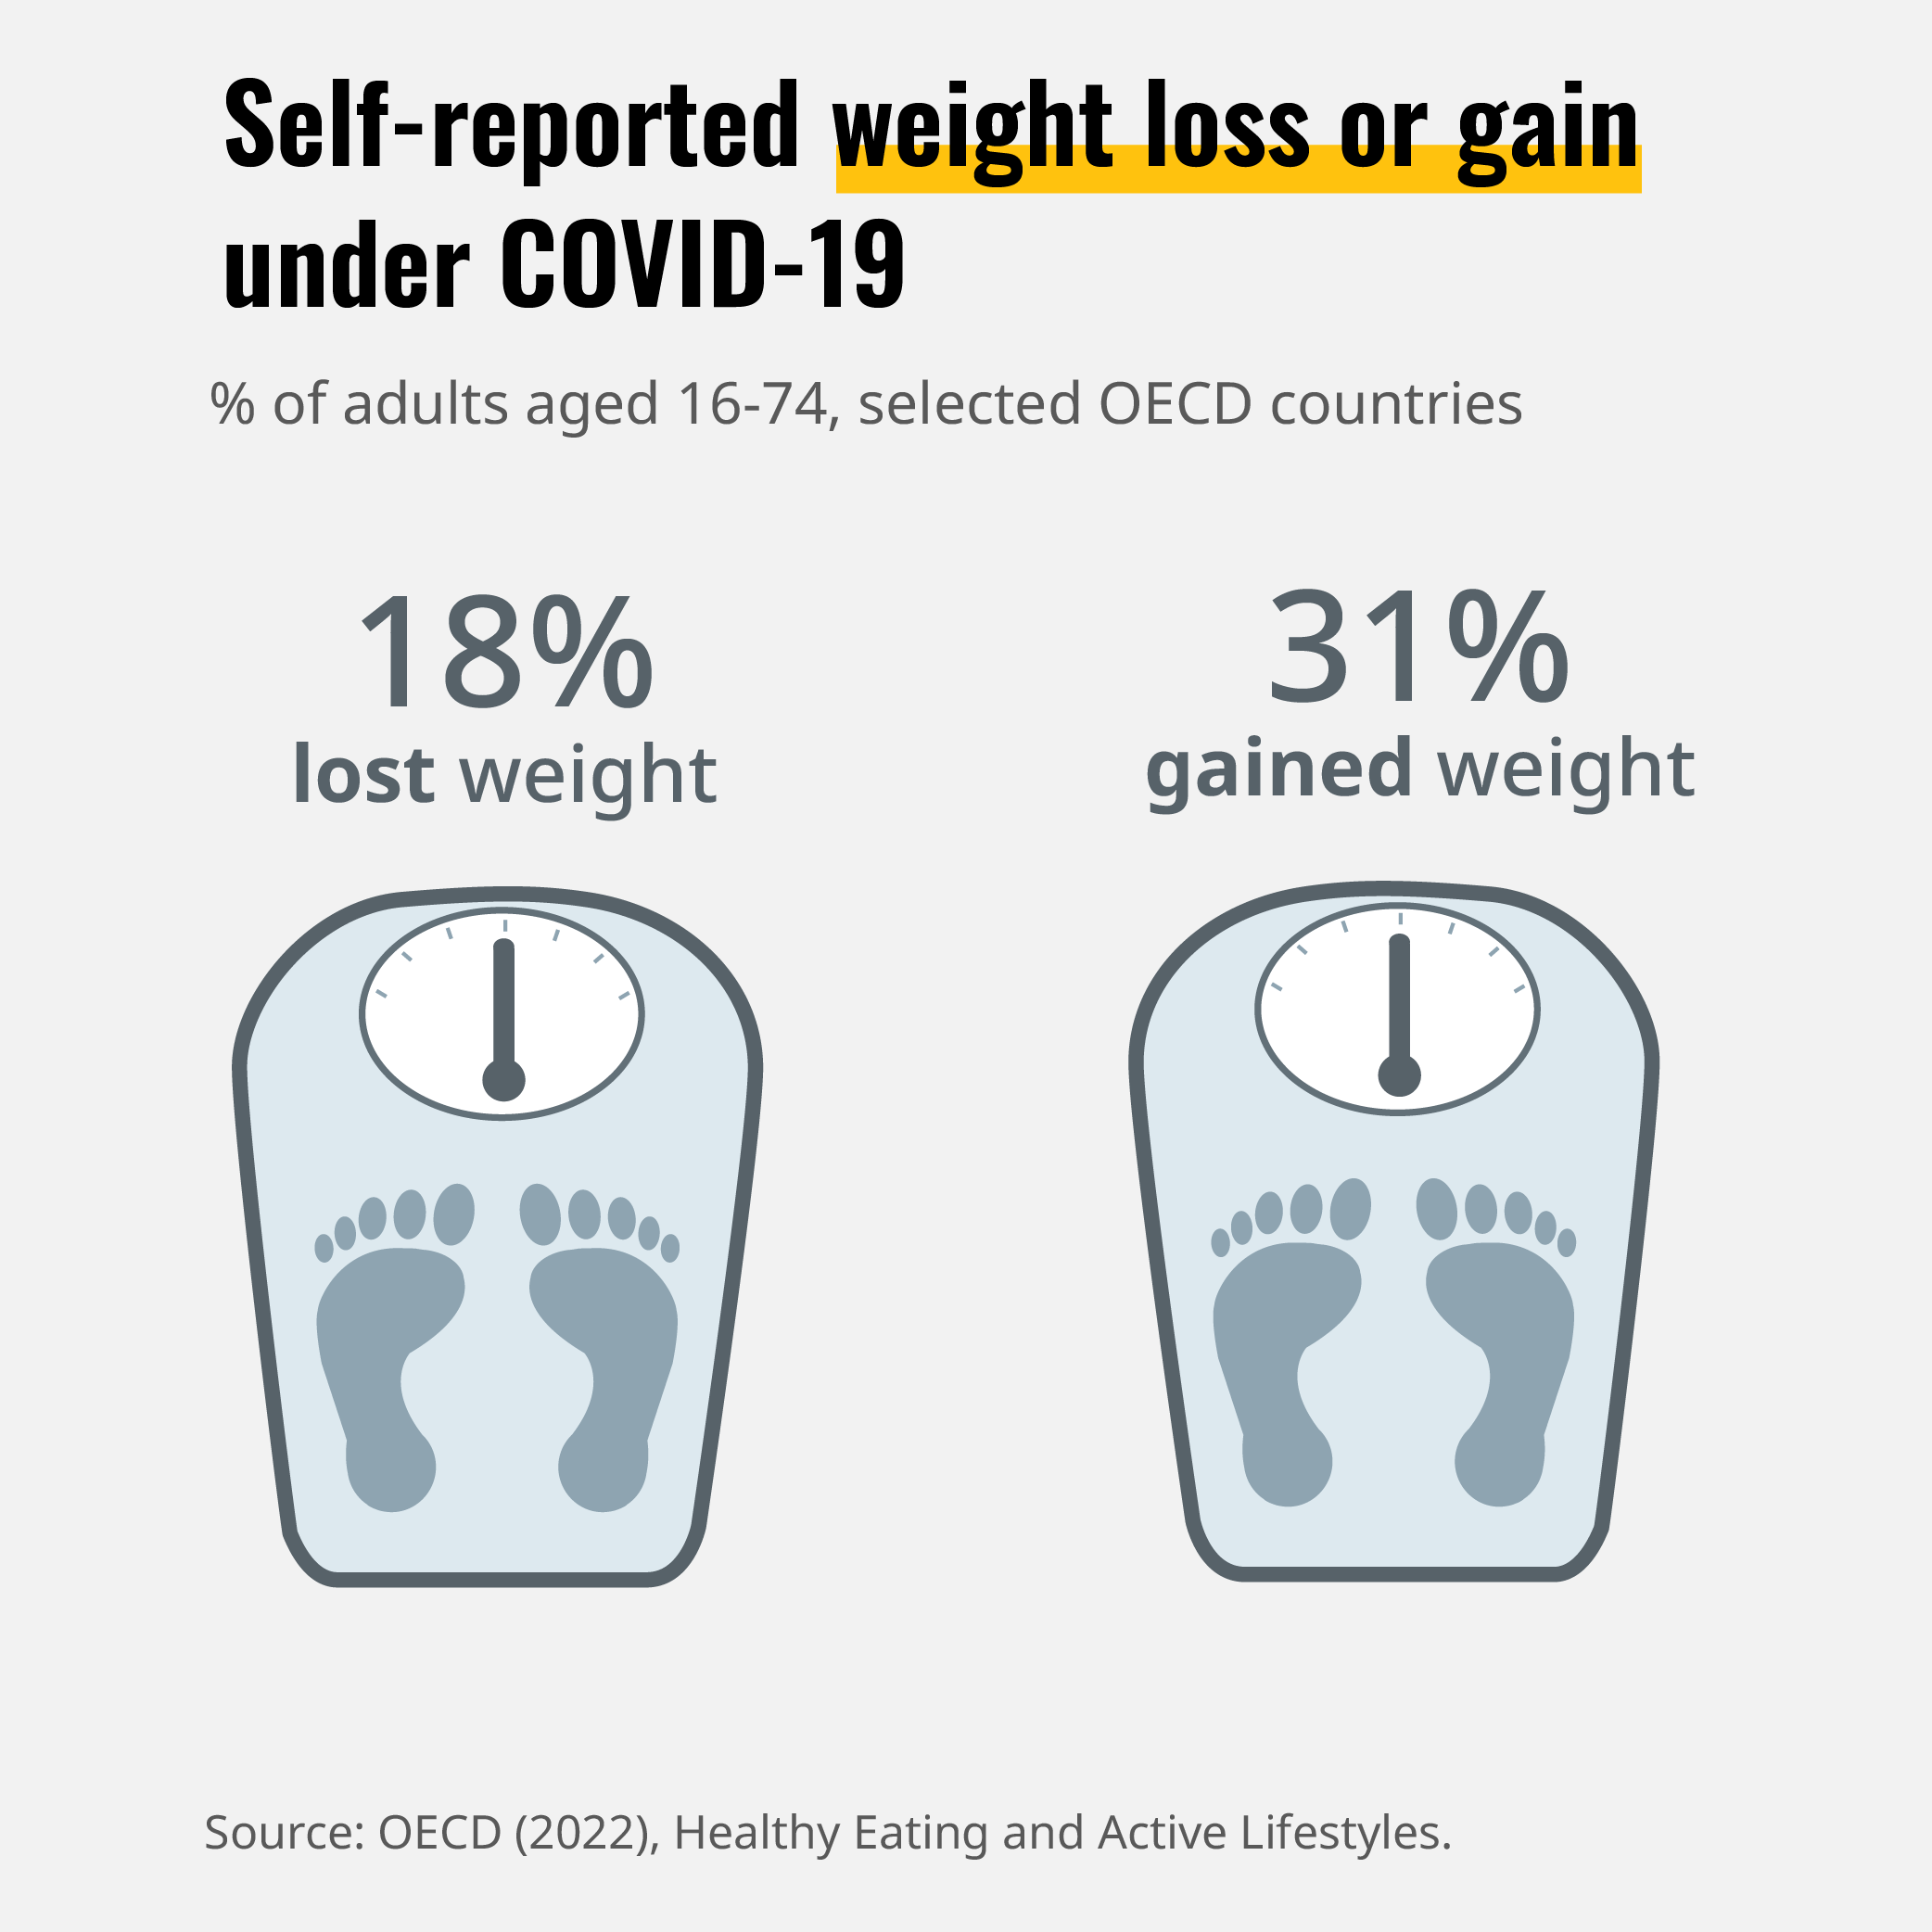 Obesity and COVID: compound and discriminatory effects